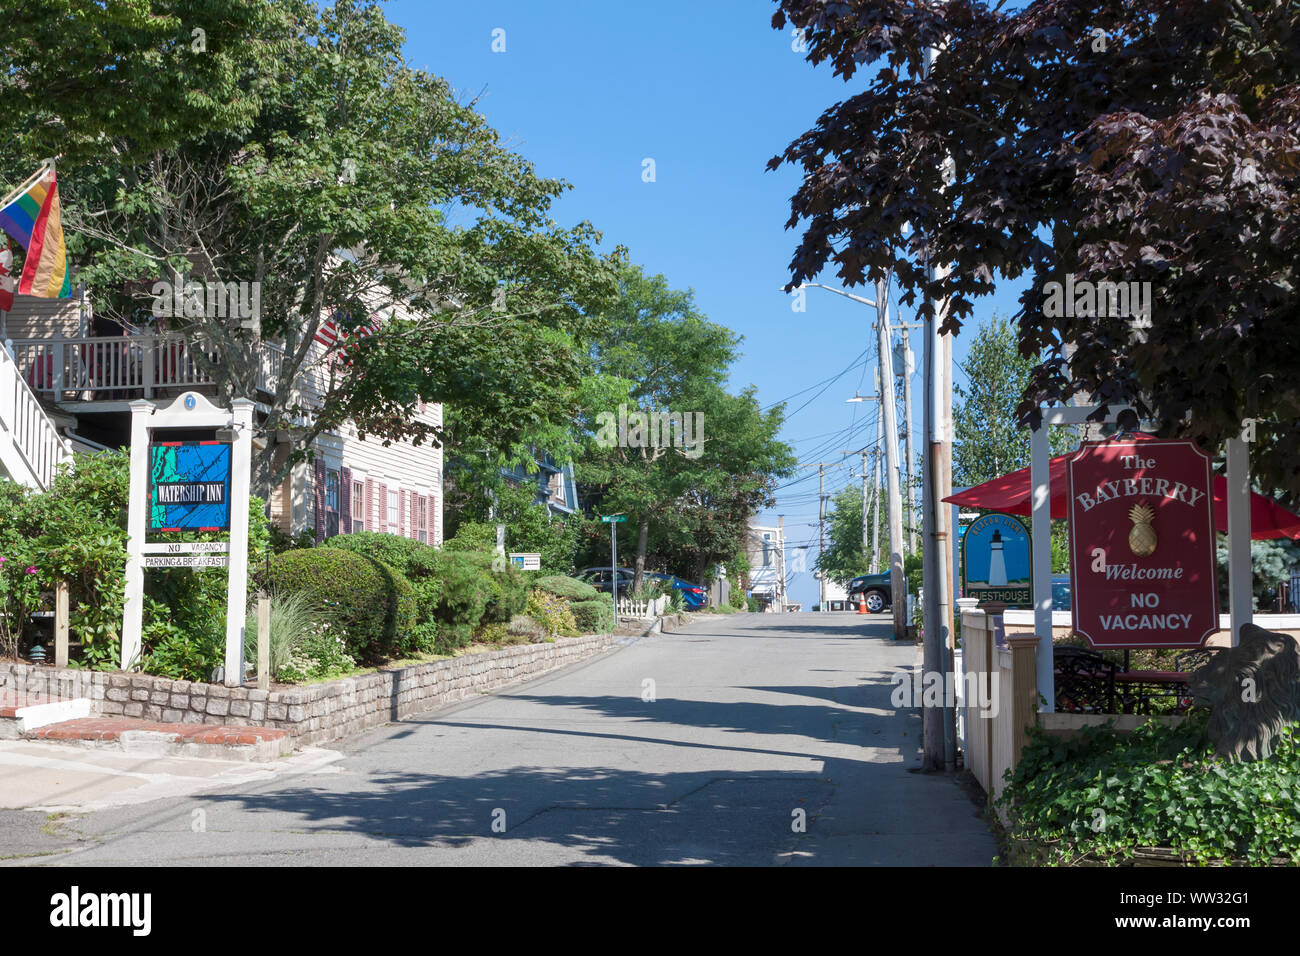 Tre locande, Watership, Bayberry e faro a luce rotante, lungo Winthrop Street a Provincetown in Massachusetts. Foto Stock